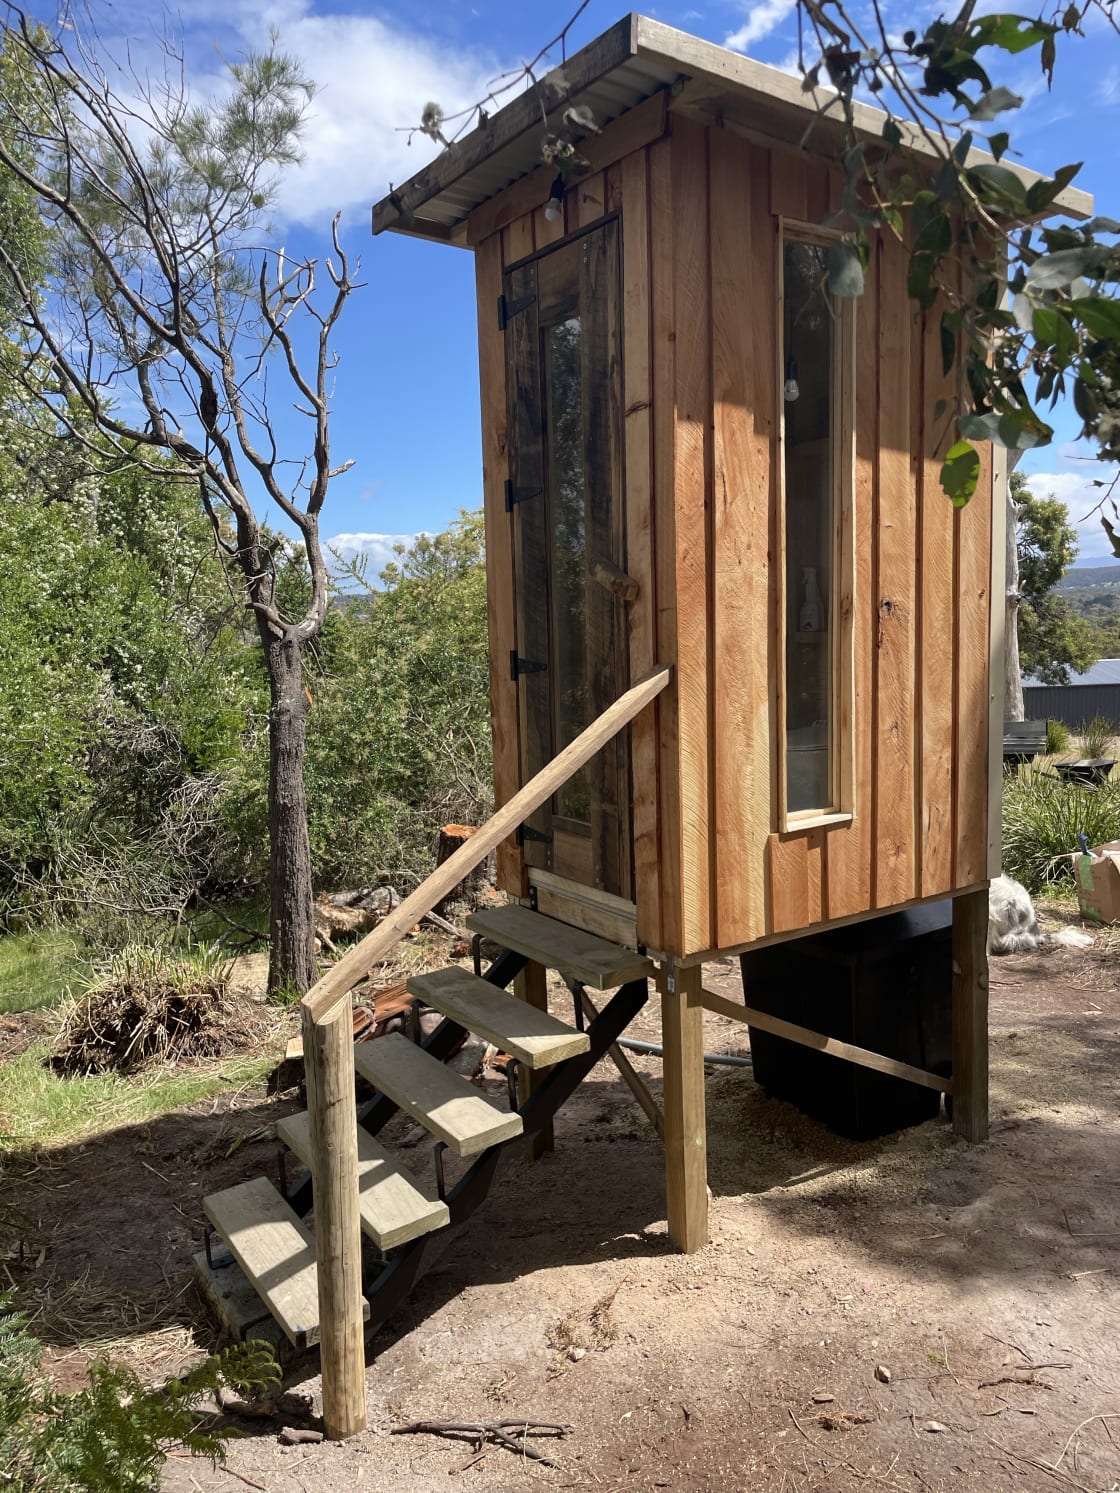 The beautiful new composting toilet with a water view! 